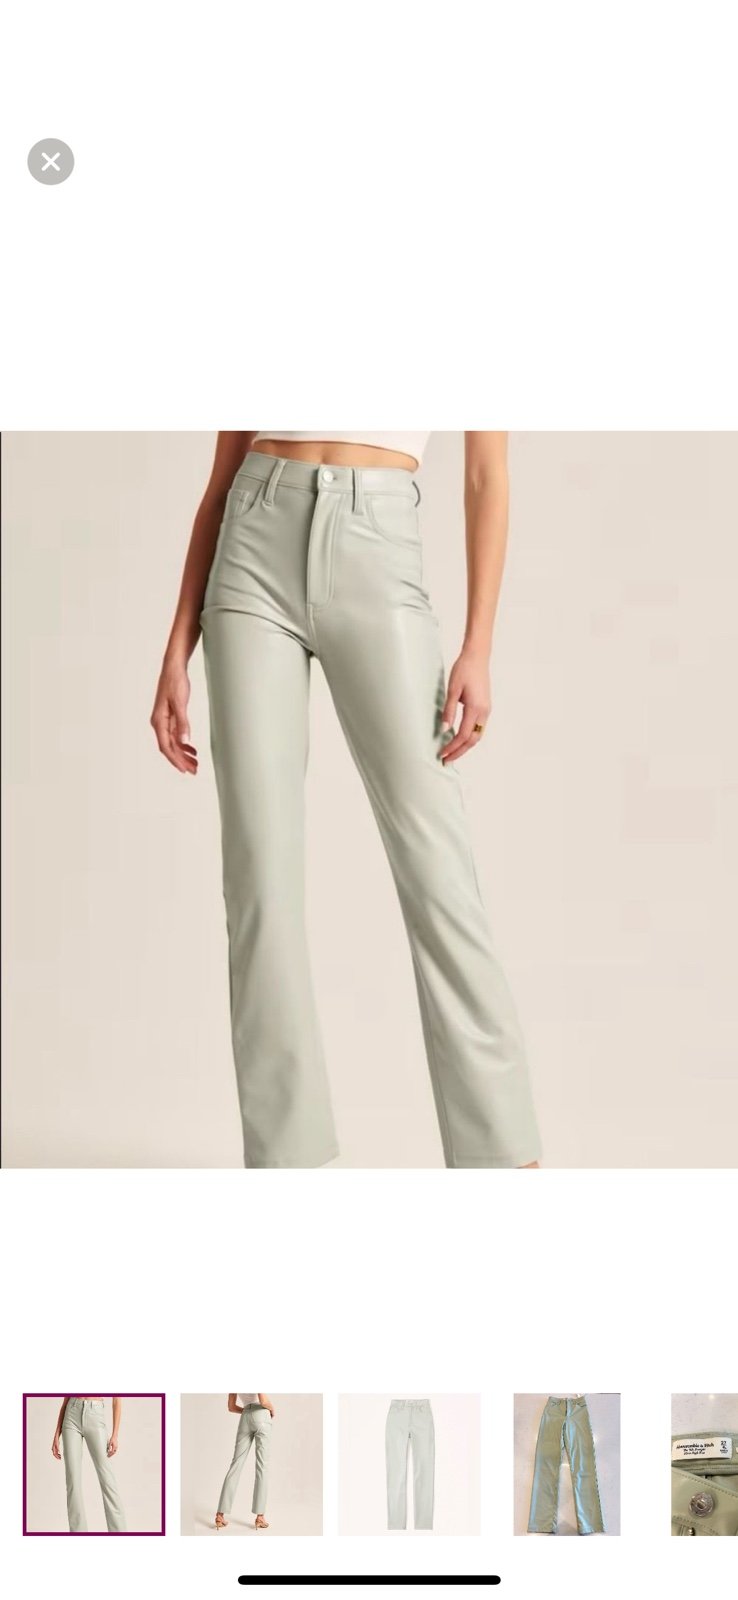 Comfortable Abercrombie Leather Pants MwPePbaof Store O